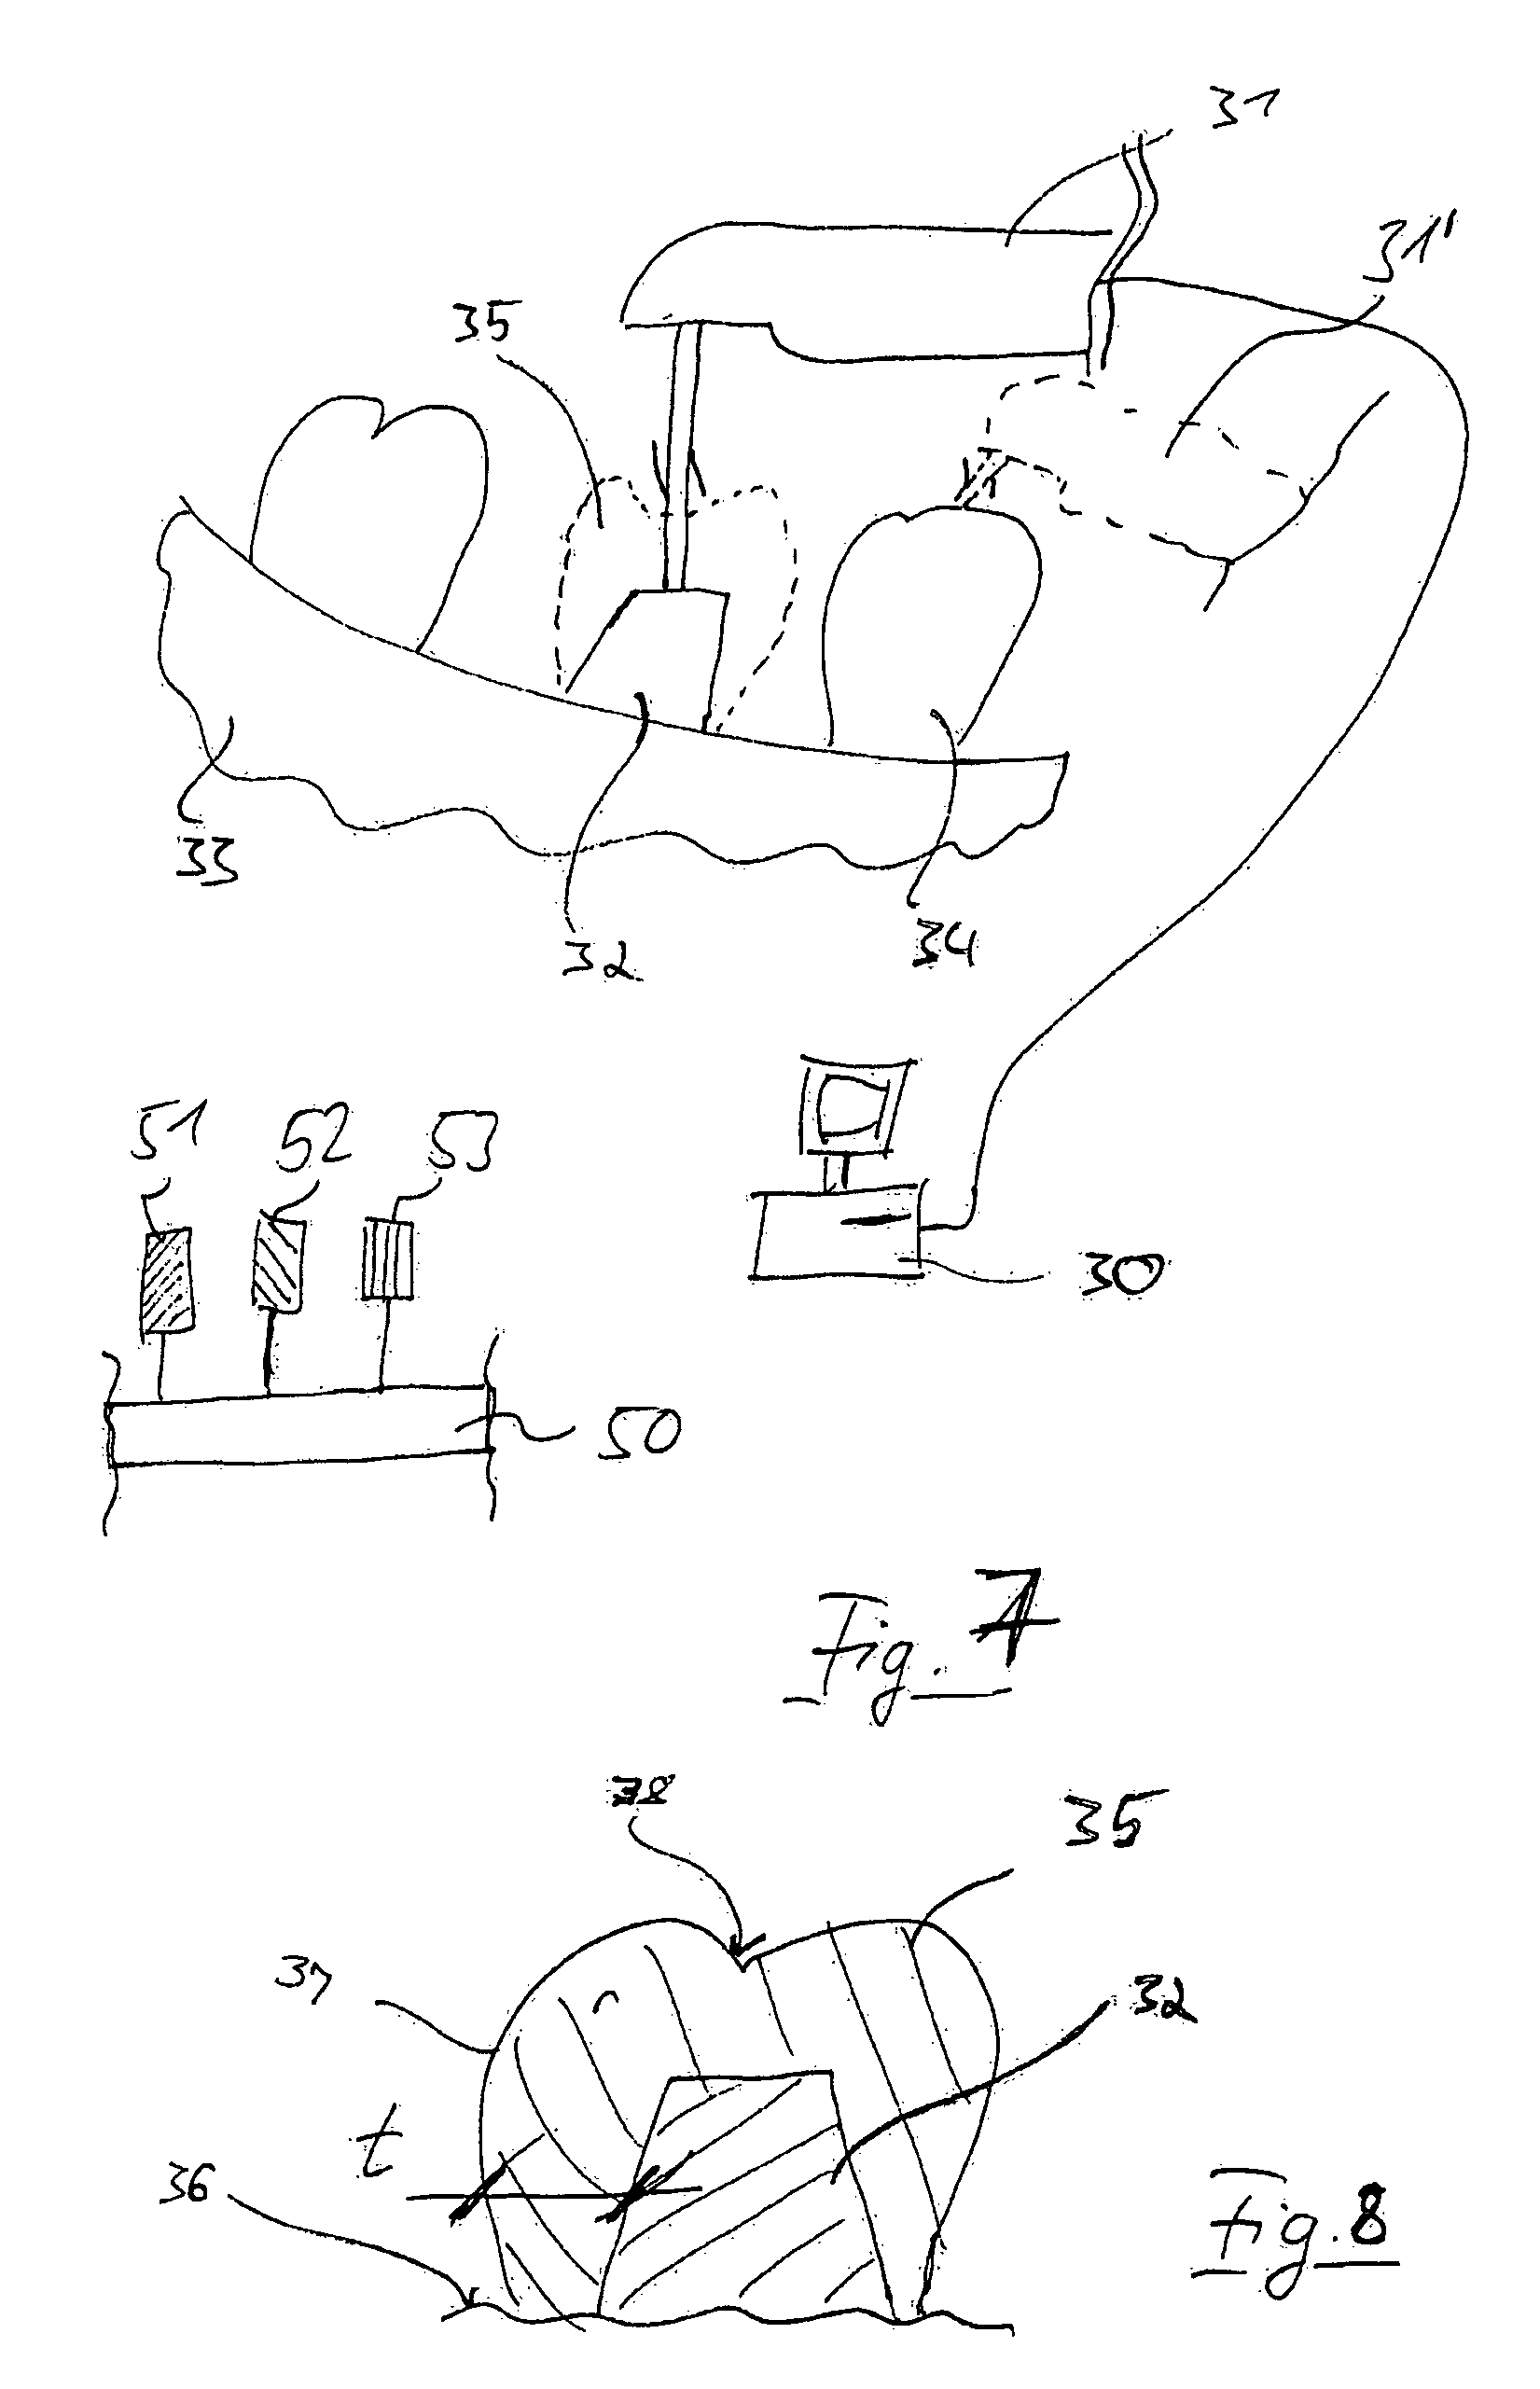 Method and apparatus for selecting non-opacious dental materials